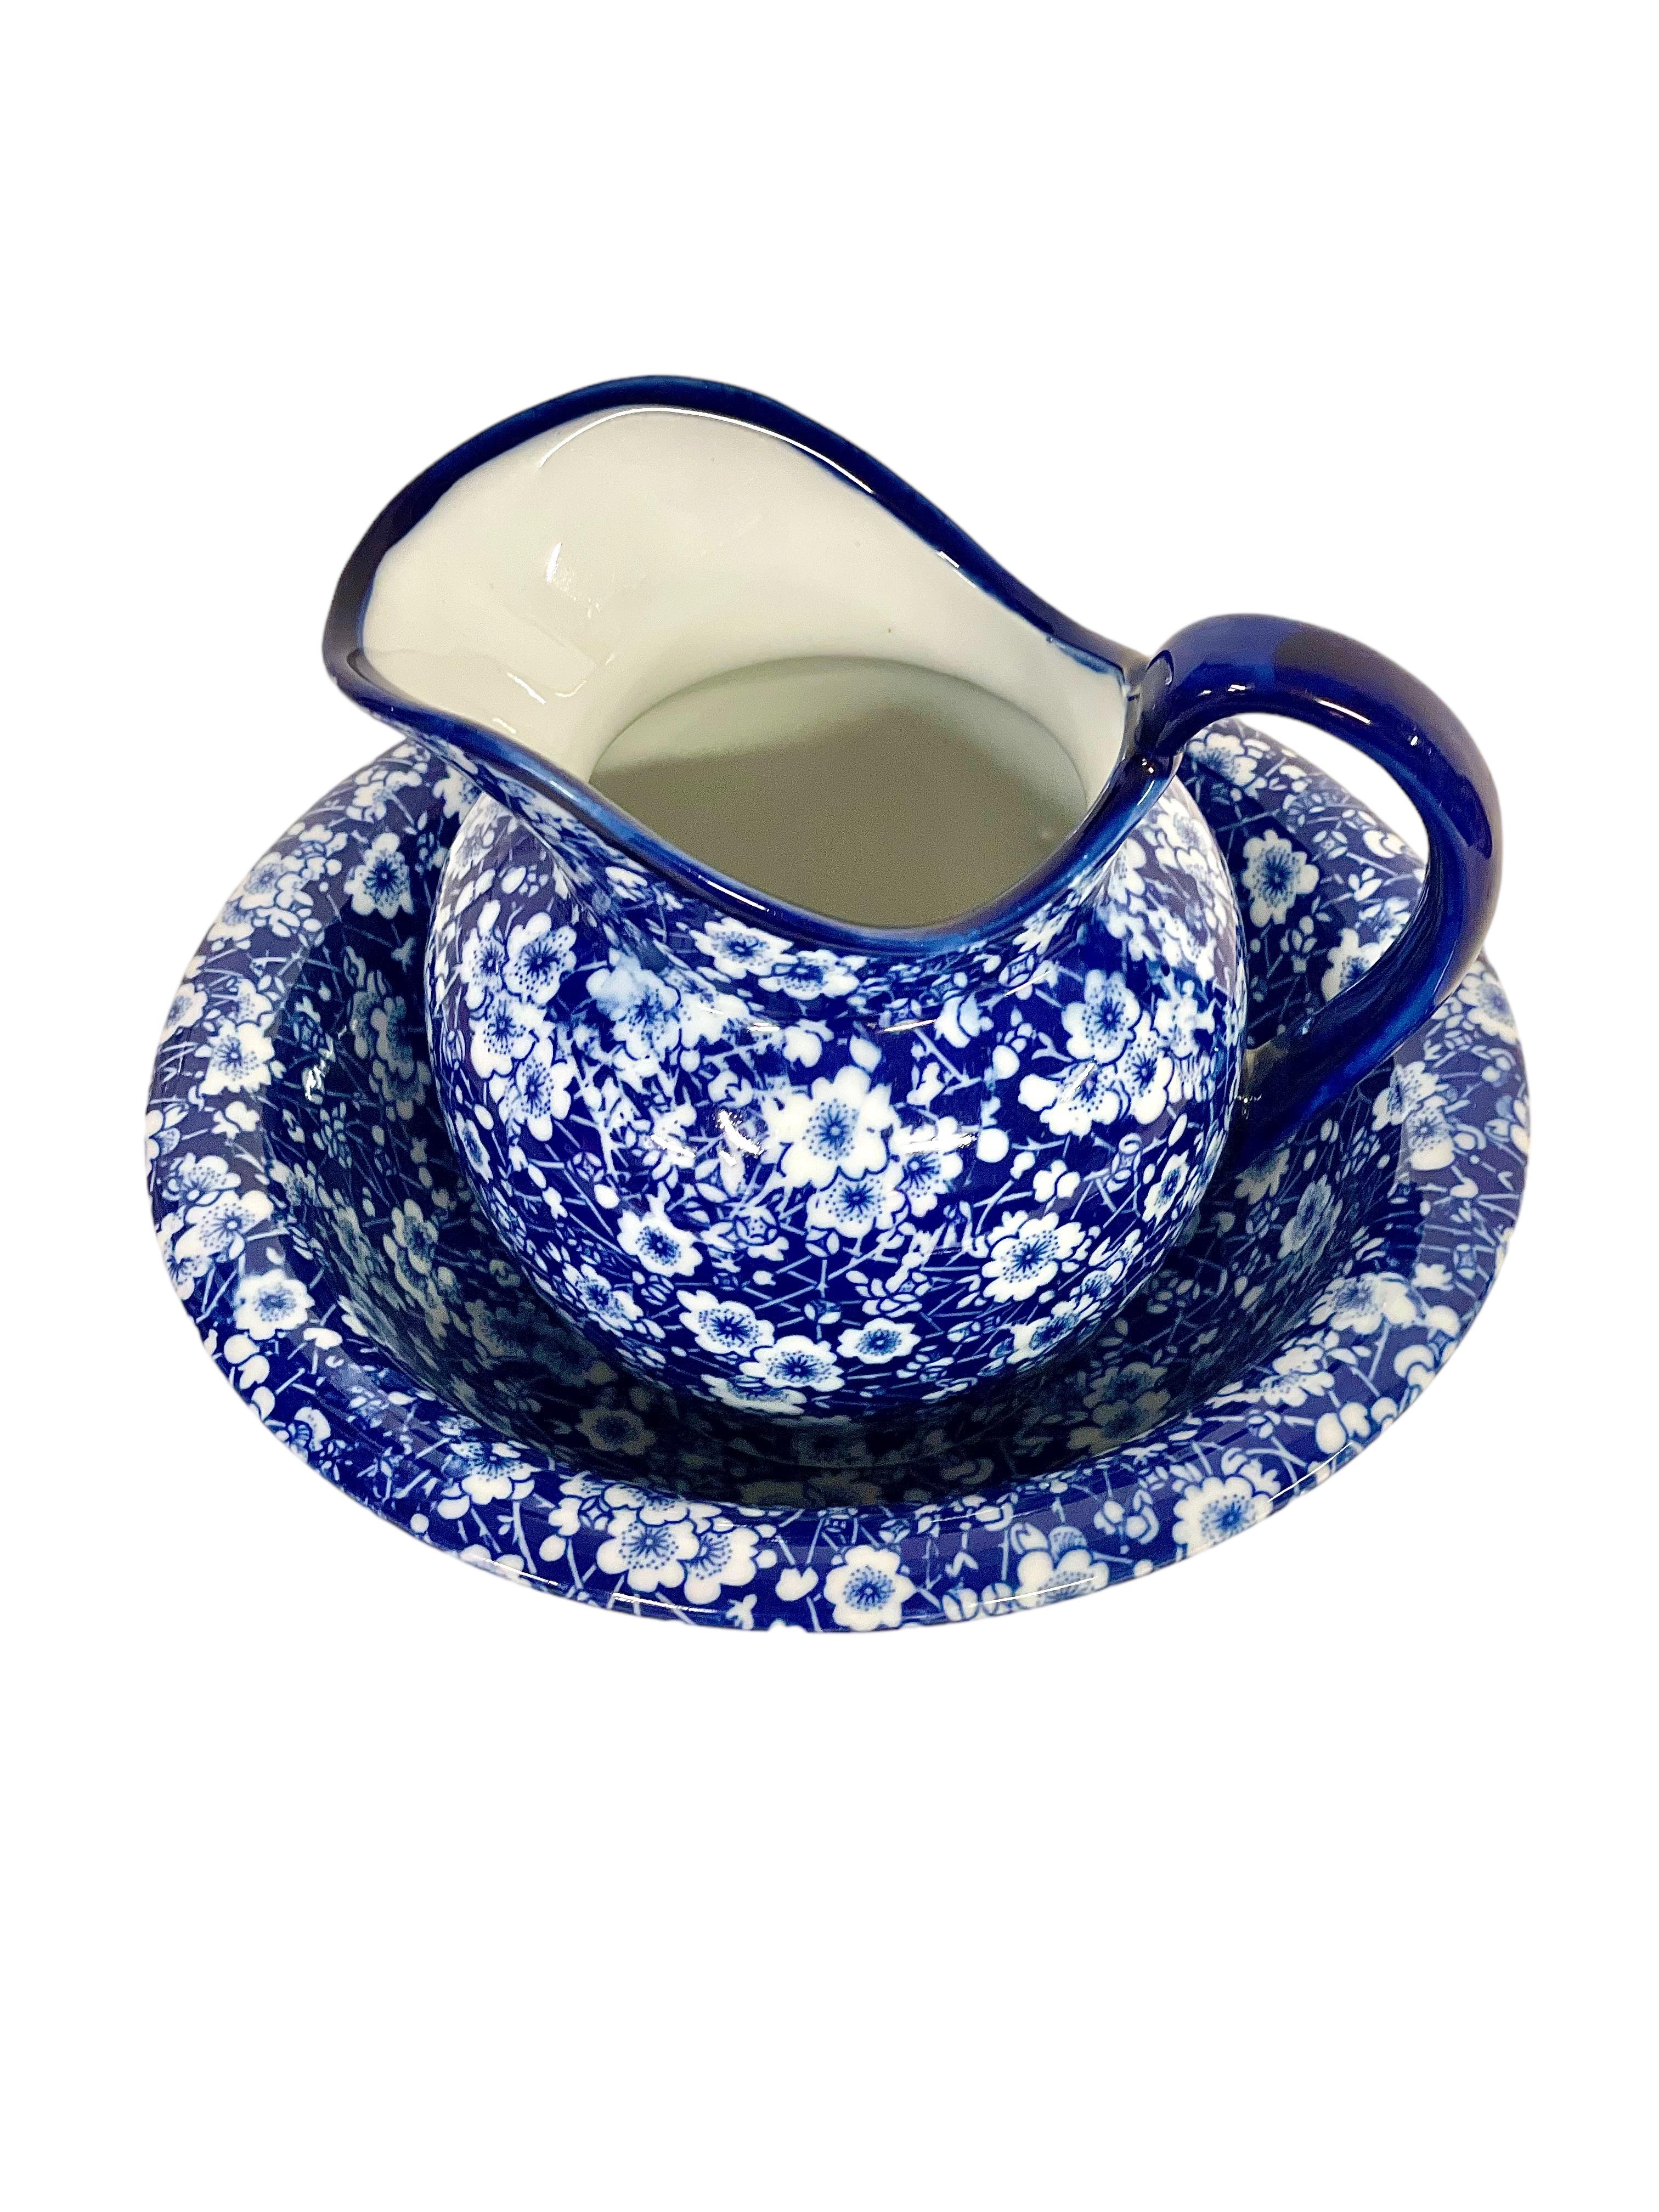 A charming vintage Ironstone pitcher and wash basin, made in England and bearing the 'Victoria Ware' mark on its base. Decorated all over in a traditional cobalt blue 'Calico' transfer pattern, this extremely pretty set would add the perfect